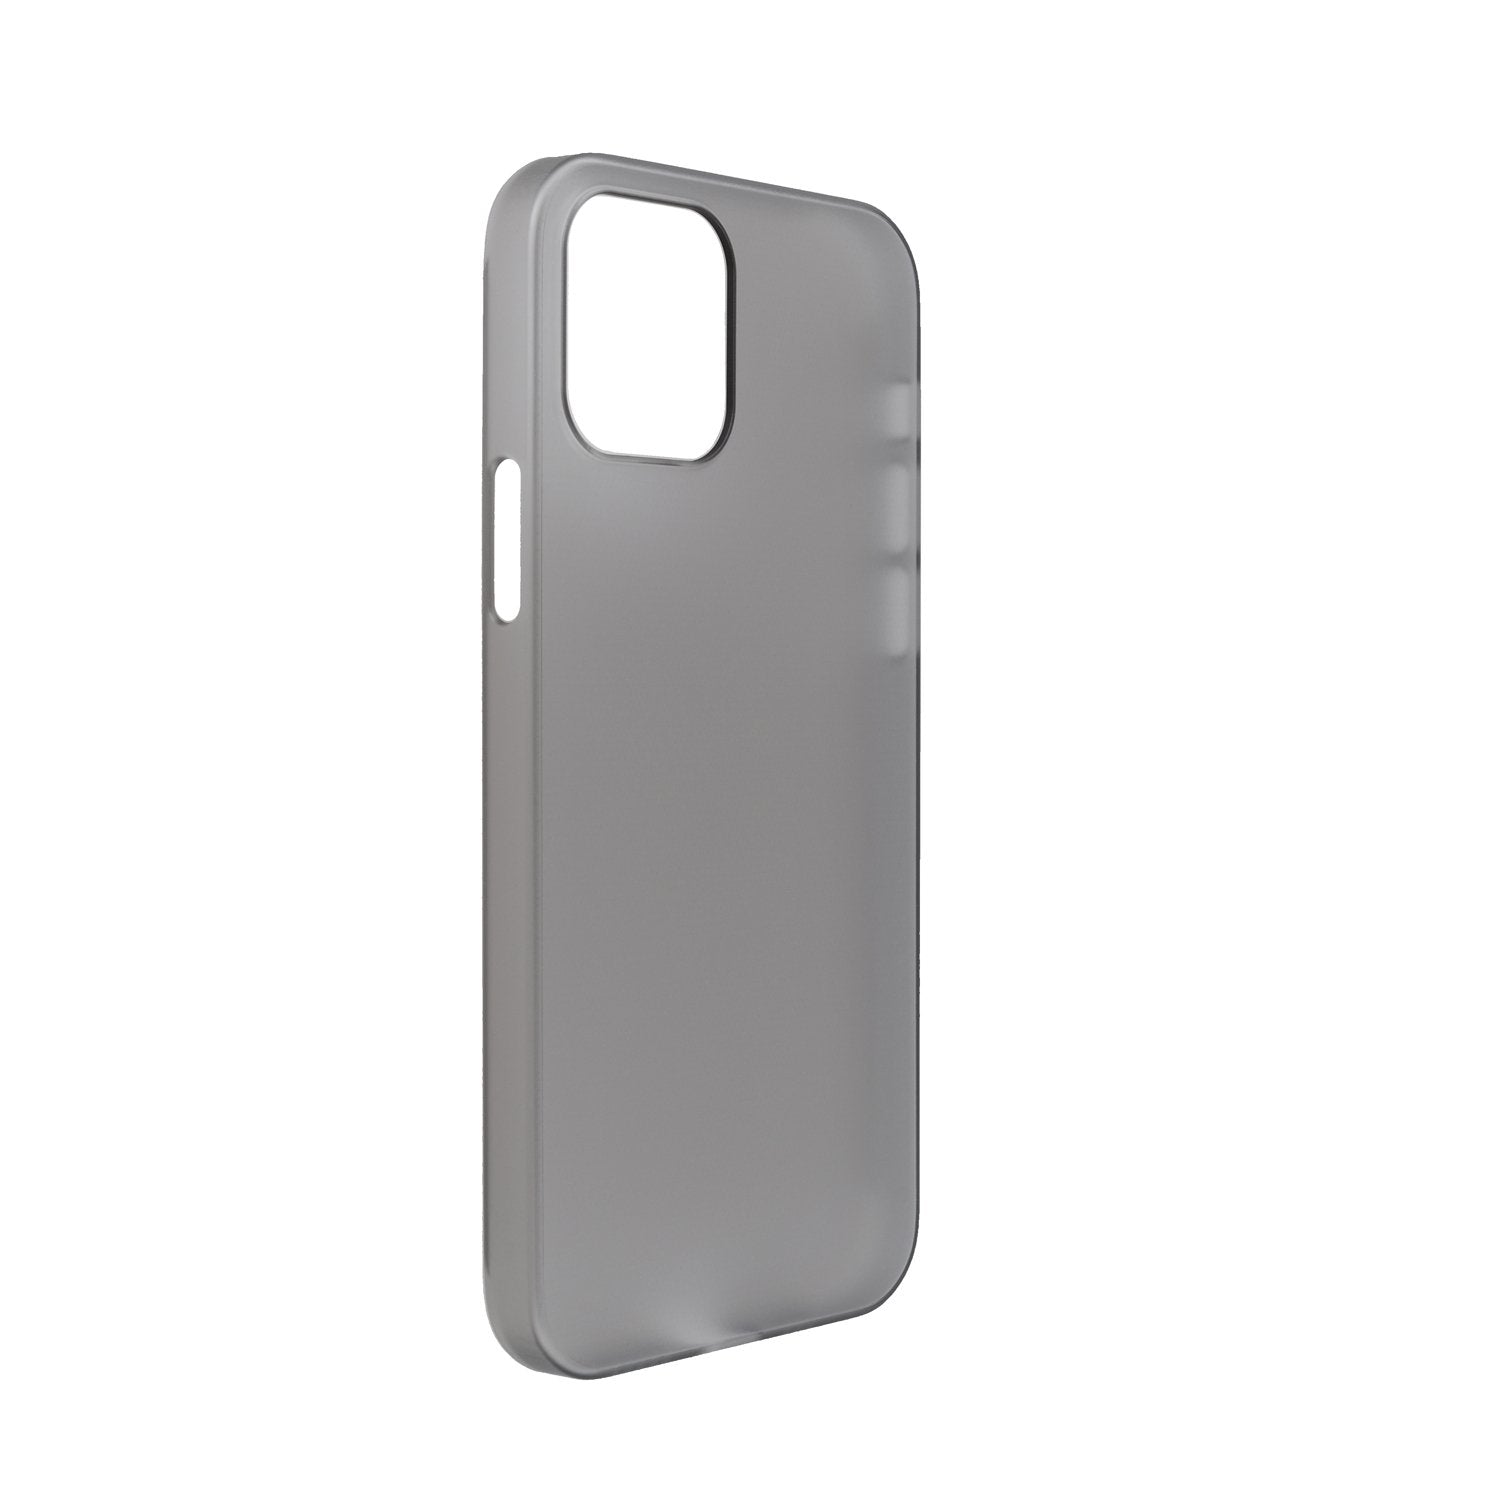 Power Support Air Jacket case for iPhone 12 mini 5.4"(2020), Clear Black Default Power Support 